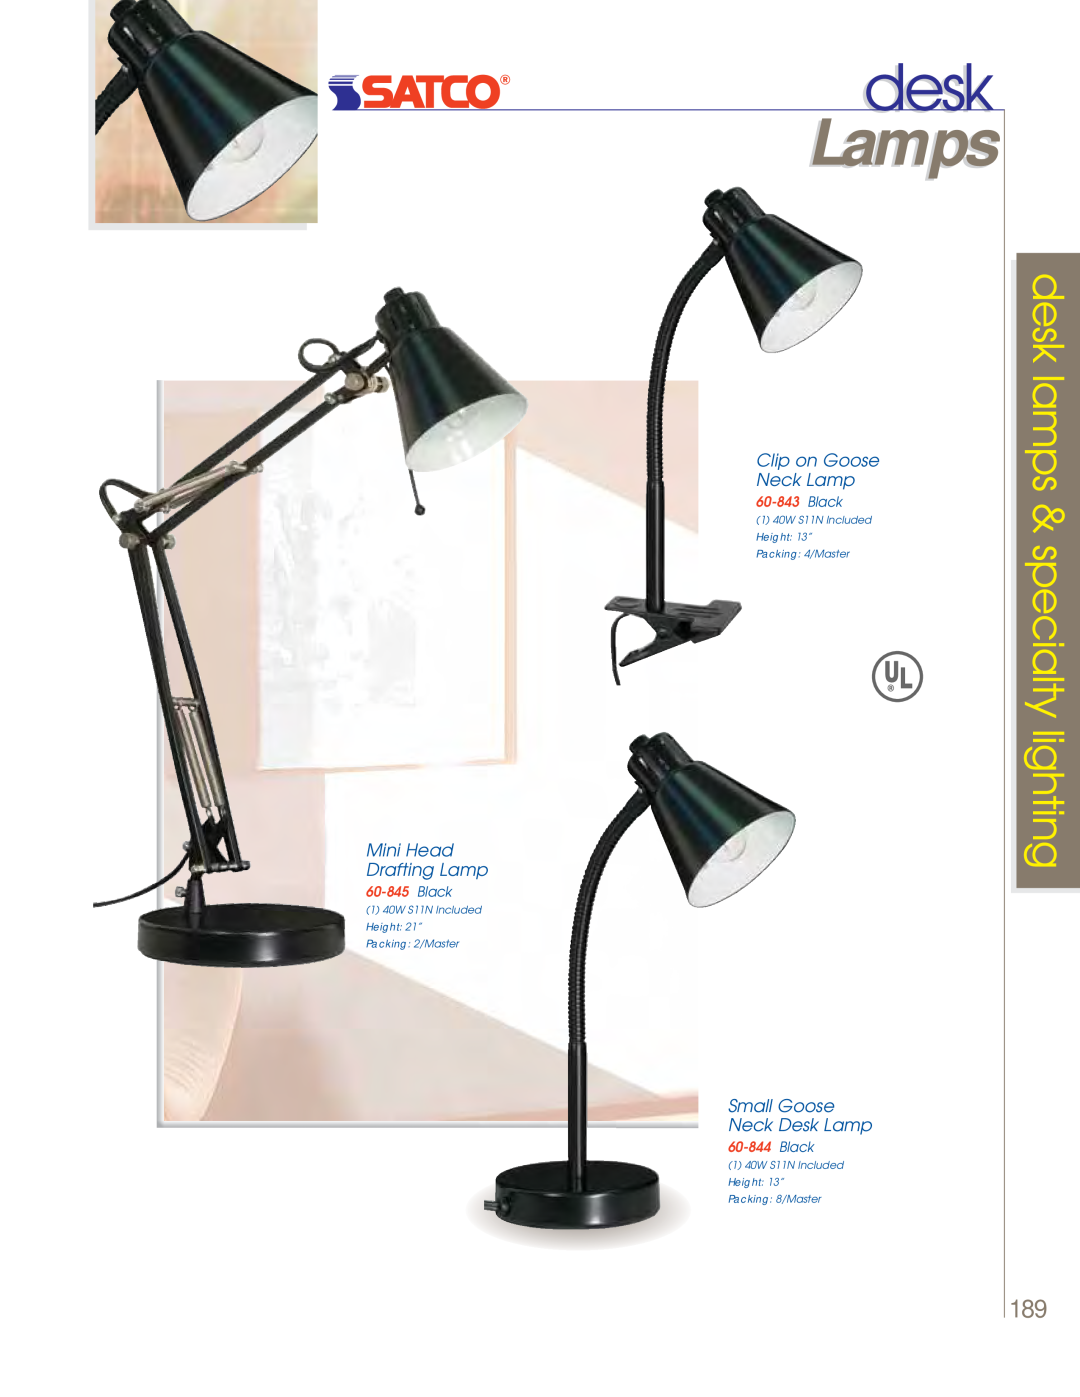 Satco Products 60-800 Lamps, desk lamps & specialty lighting, Mini Head Drafting Lamp, Clip on Goose Neck Lamp, Black 